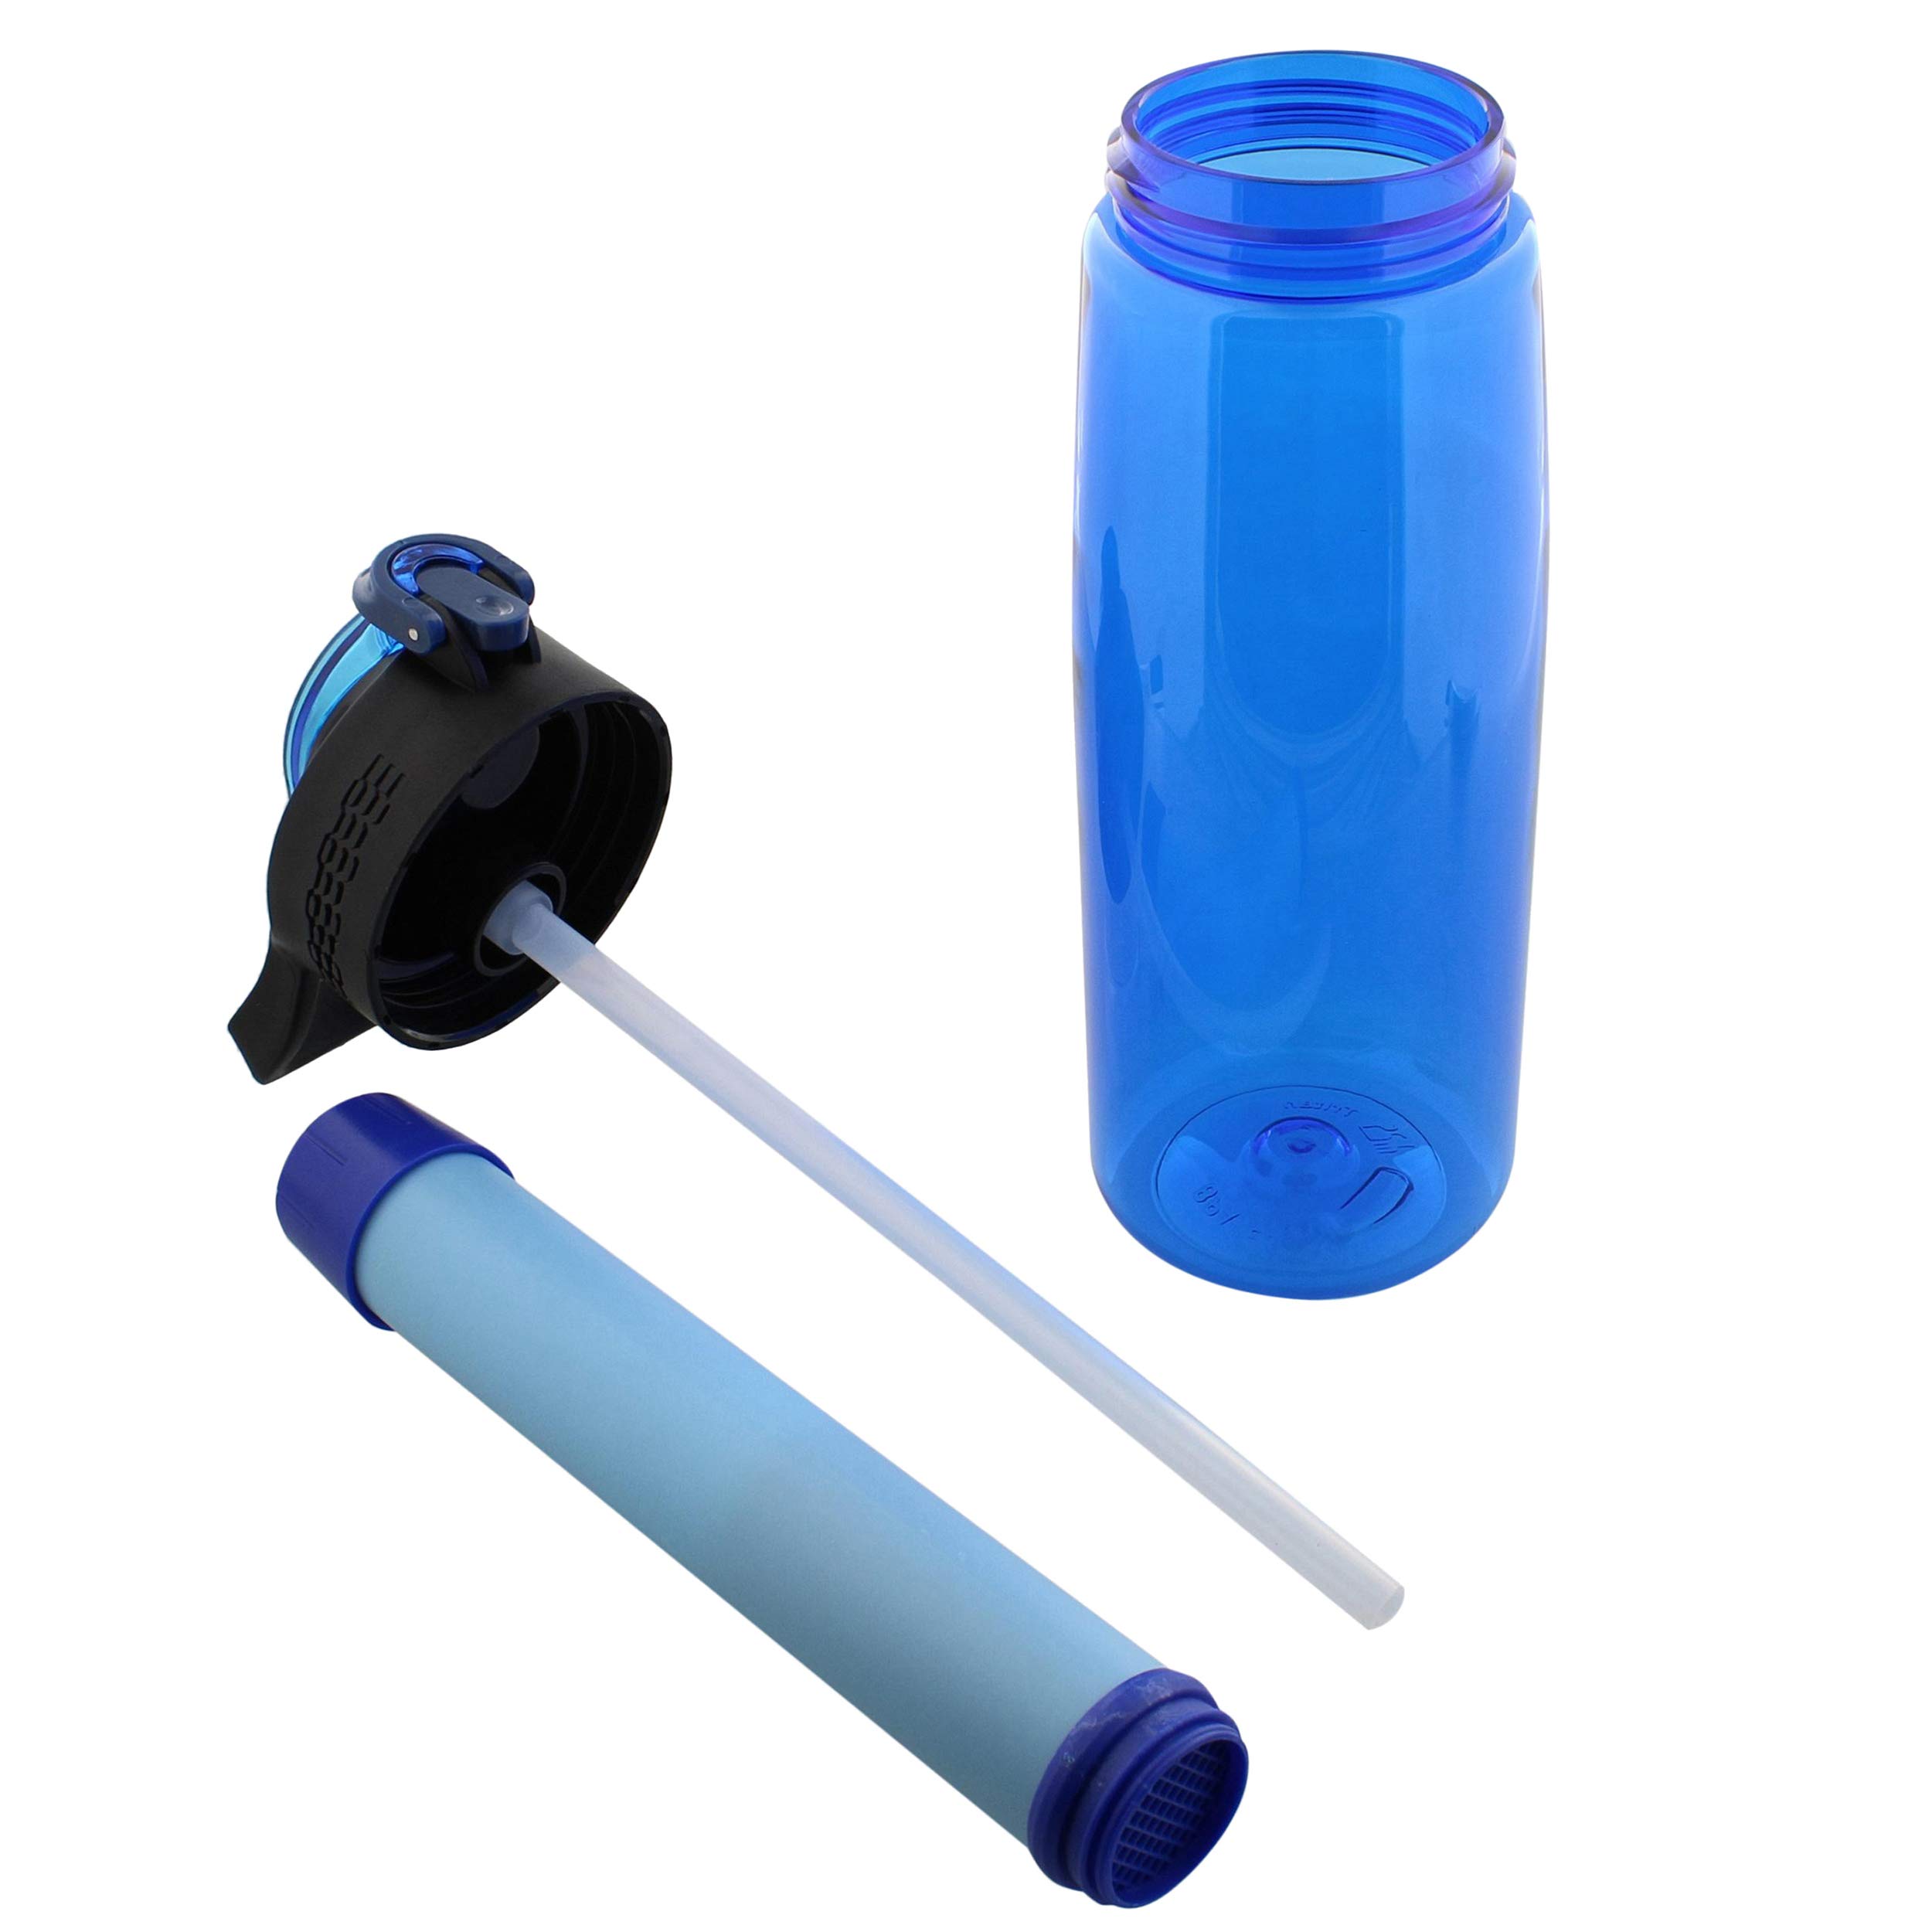 SDS Water Filter Bottle - Blue Filtering Water Bottle Filter Travel Accessory for Safe Drinking Camping Water Purifier